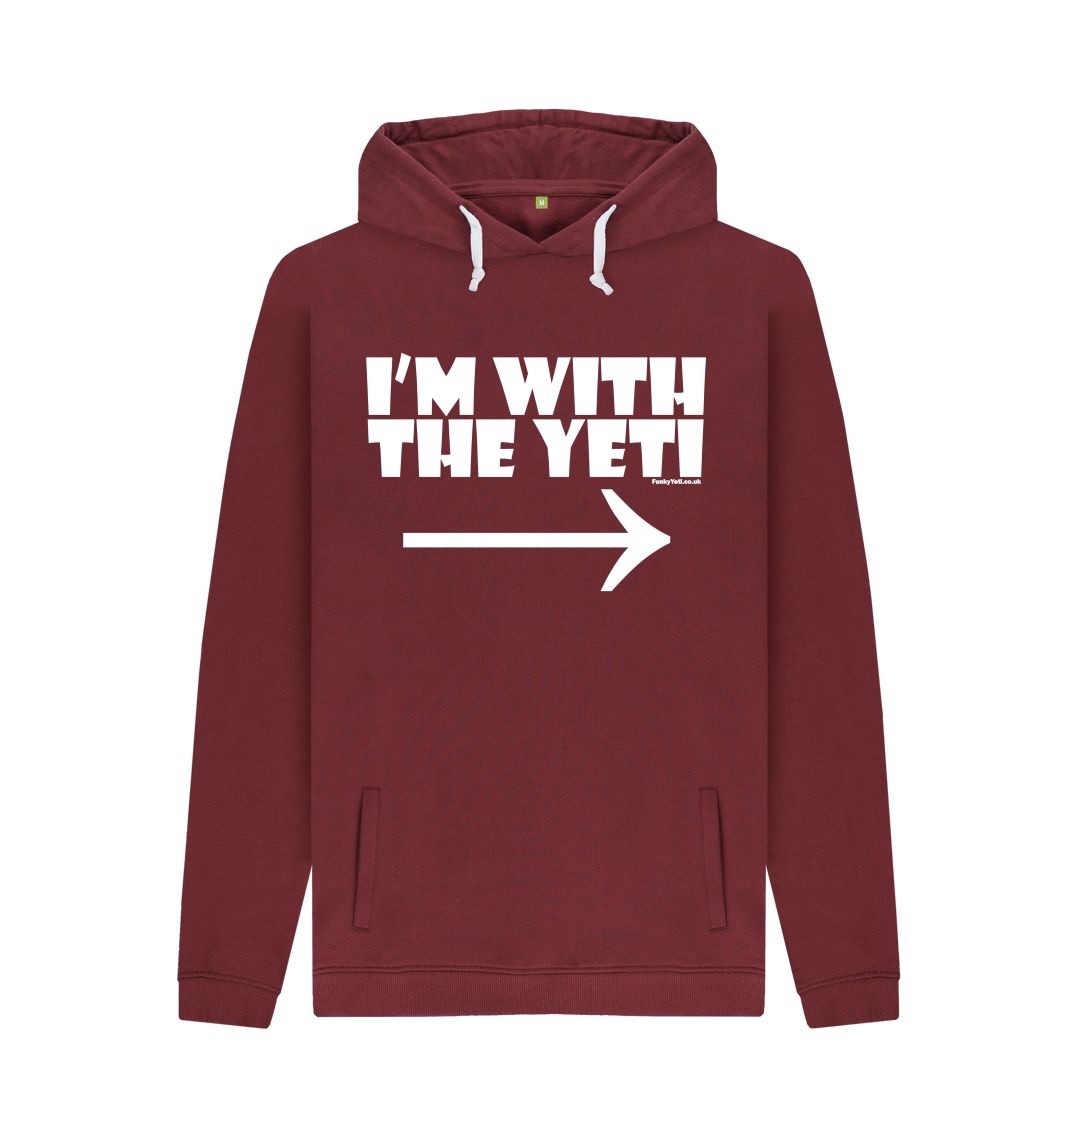 Red Wine Funky Yeti Men's Pullover Hoodie - I'm With The Yeti